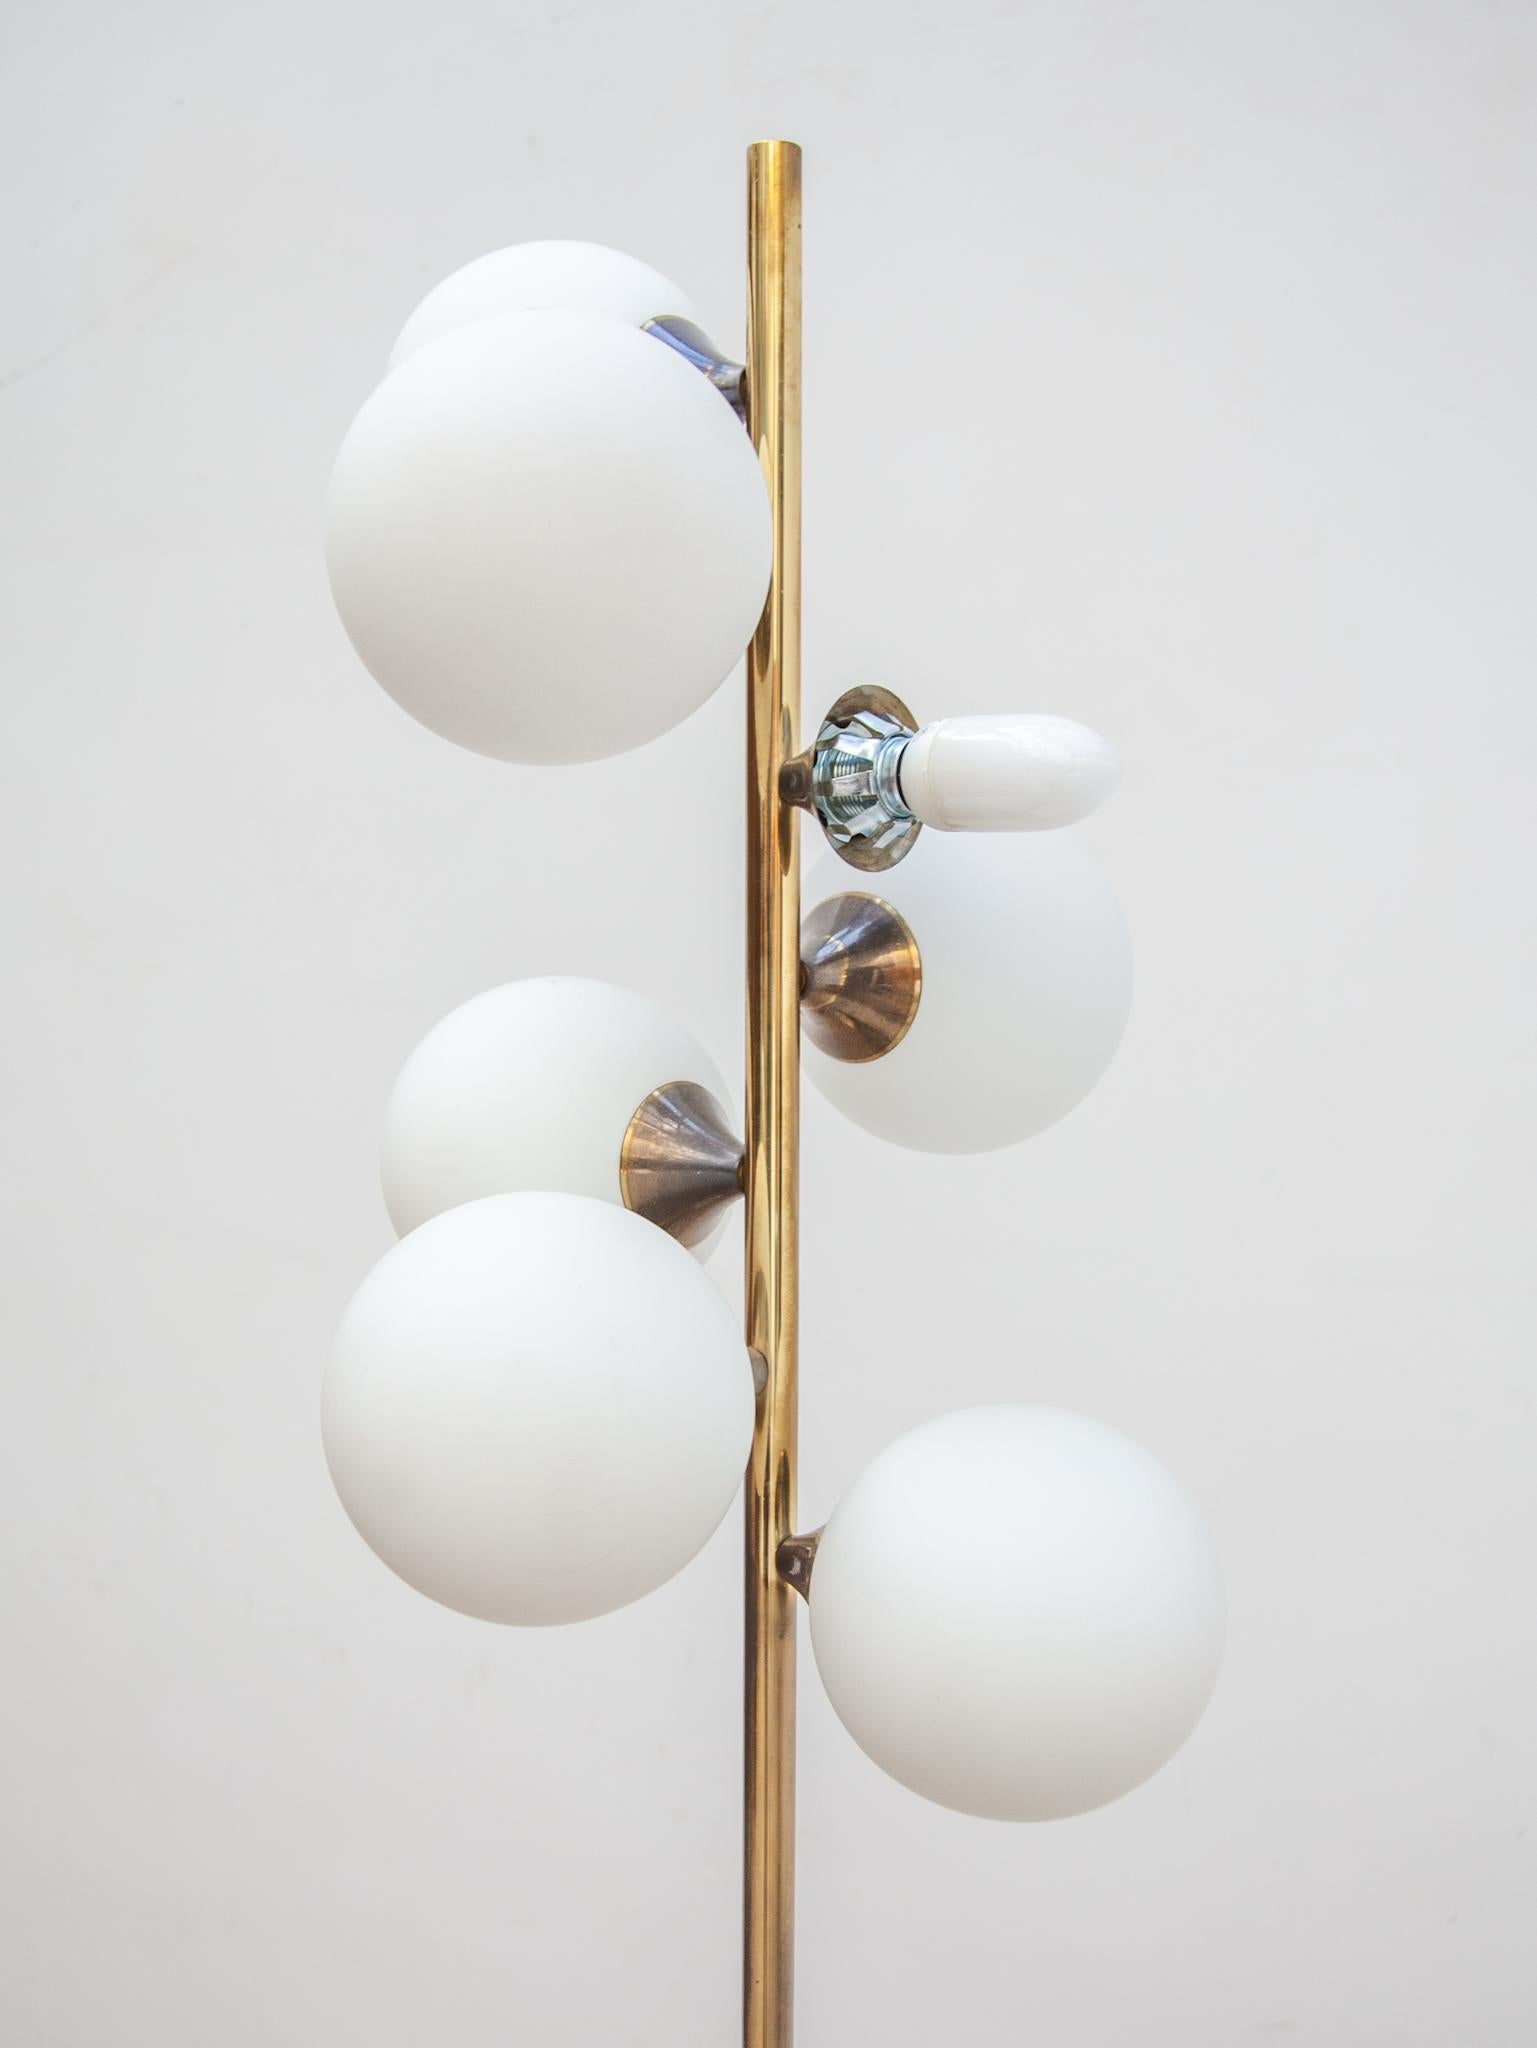 Mid-20th Century Midcentury Brass and Seven Arm Opaline Globe Floor Lamp by Kaiser, Germany For Sale